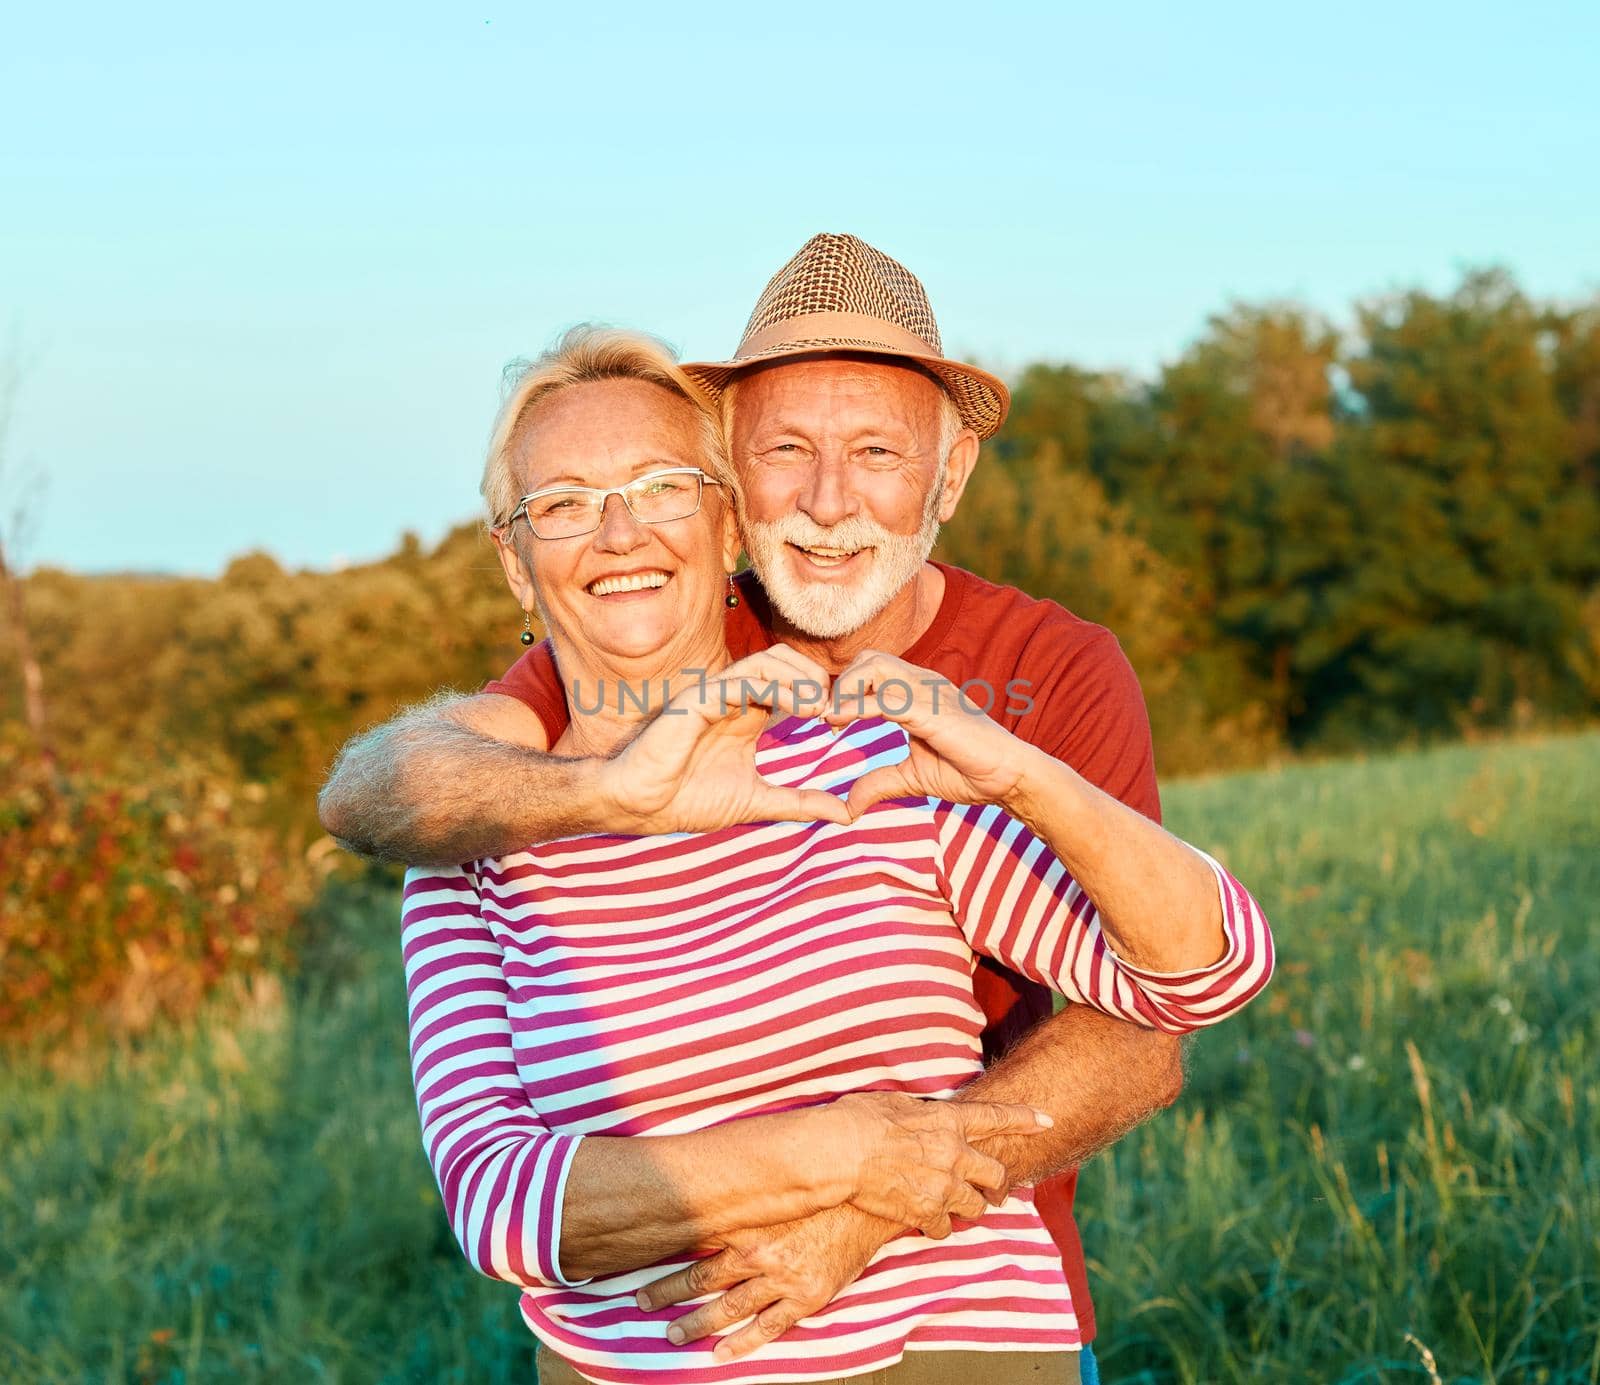 woman man outdoor senior couple happy lifestyle retirement together smiling love old nature mature by Picsfive